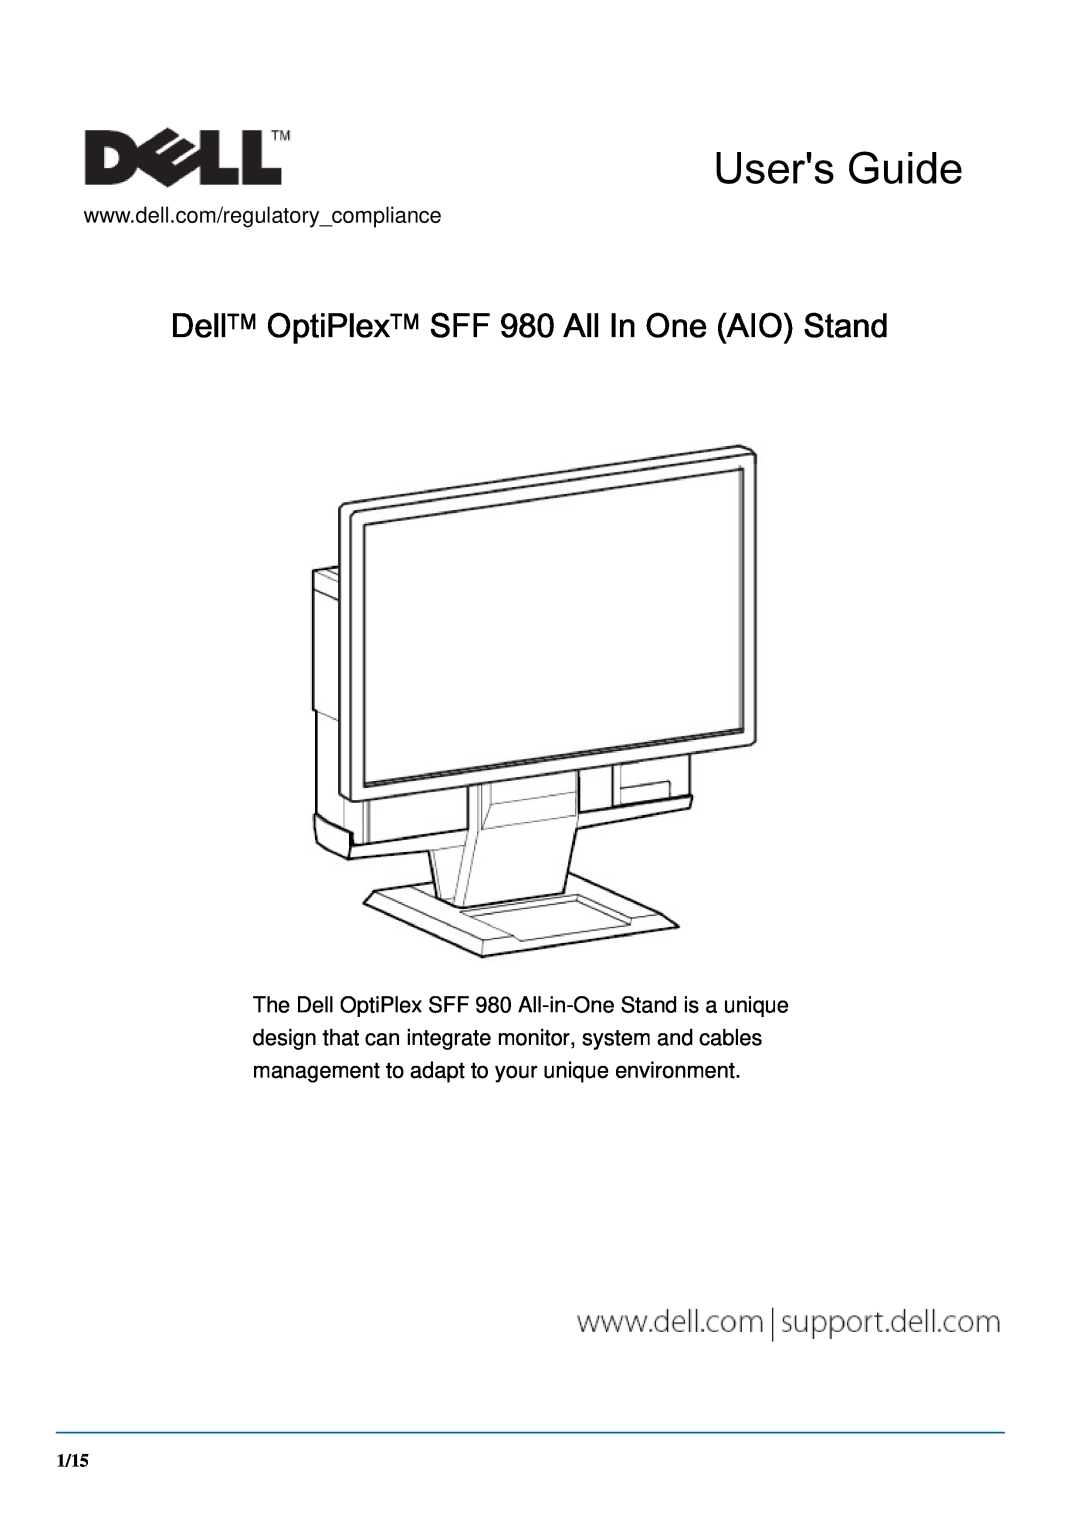 Dell manual DellTM OptiPlexTM SFF 980 All In One AIO Stand, Users Guide, 1/15 